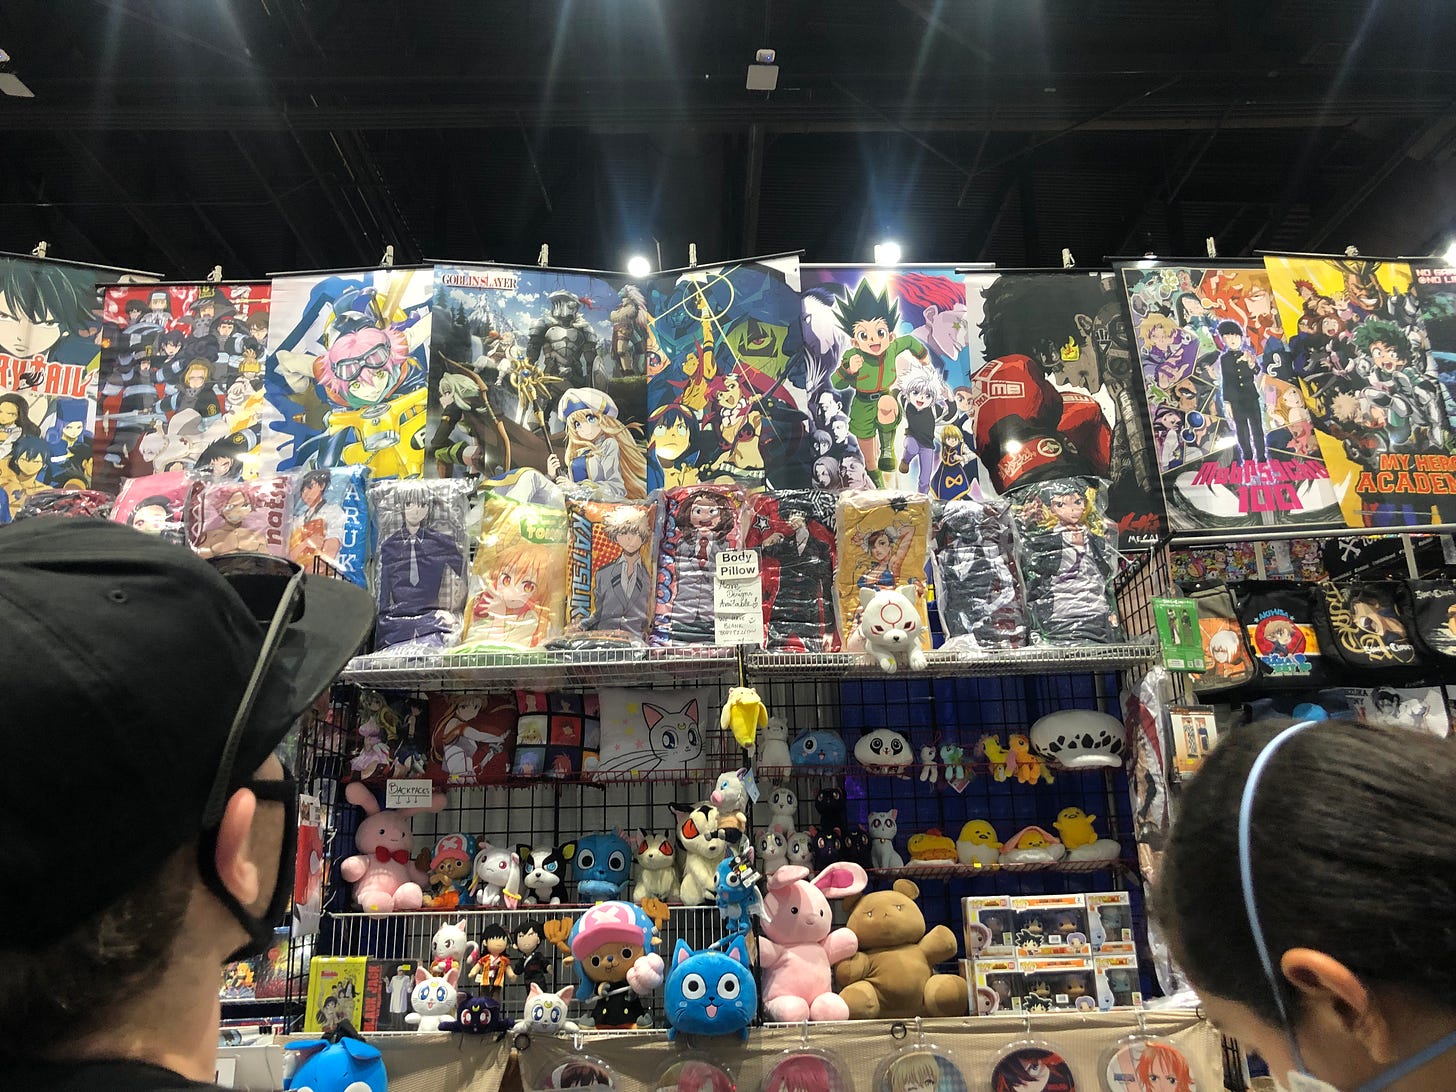 Anime posters and plushies and...booby pads.